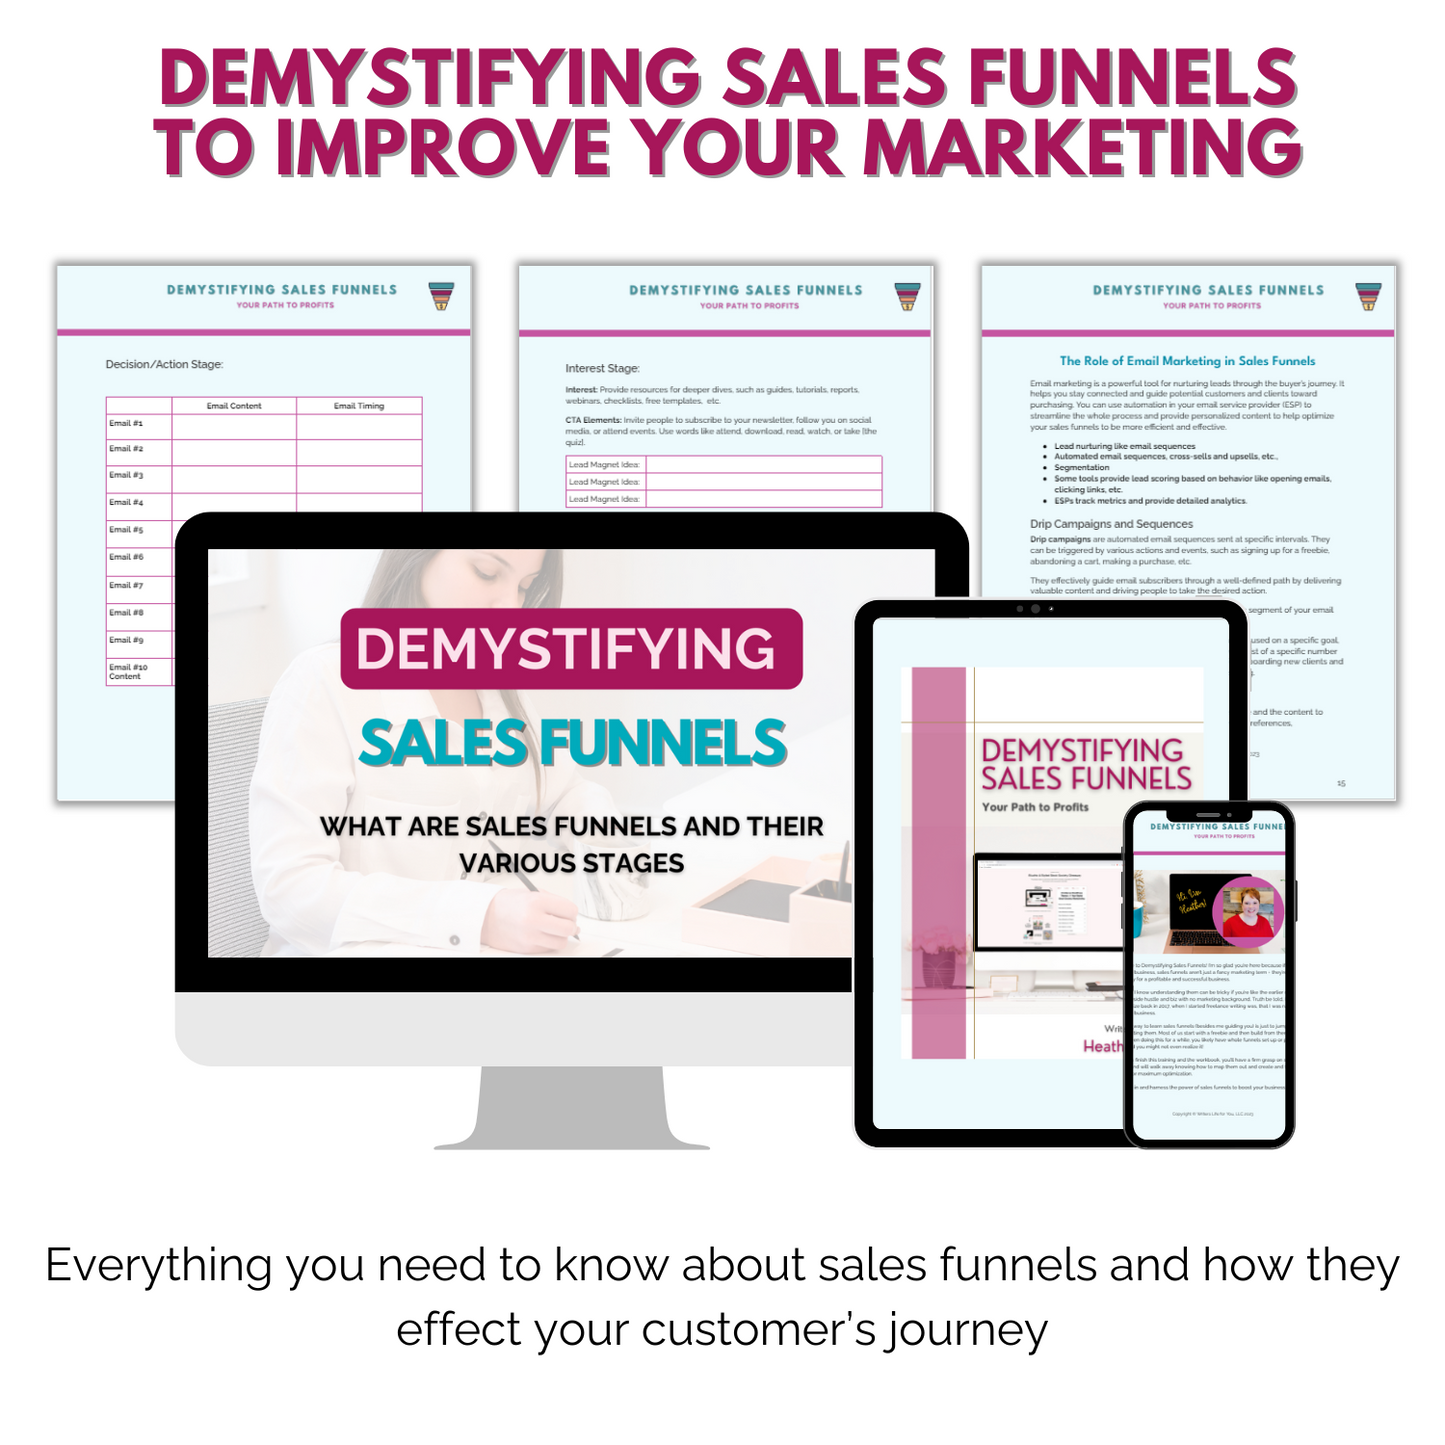 Demystifying Sales Funnels resources to improve your marketing and teach you everything you need to know